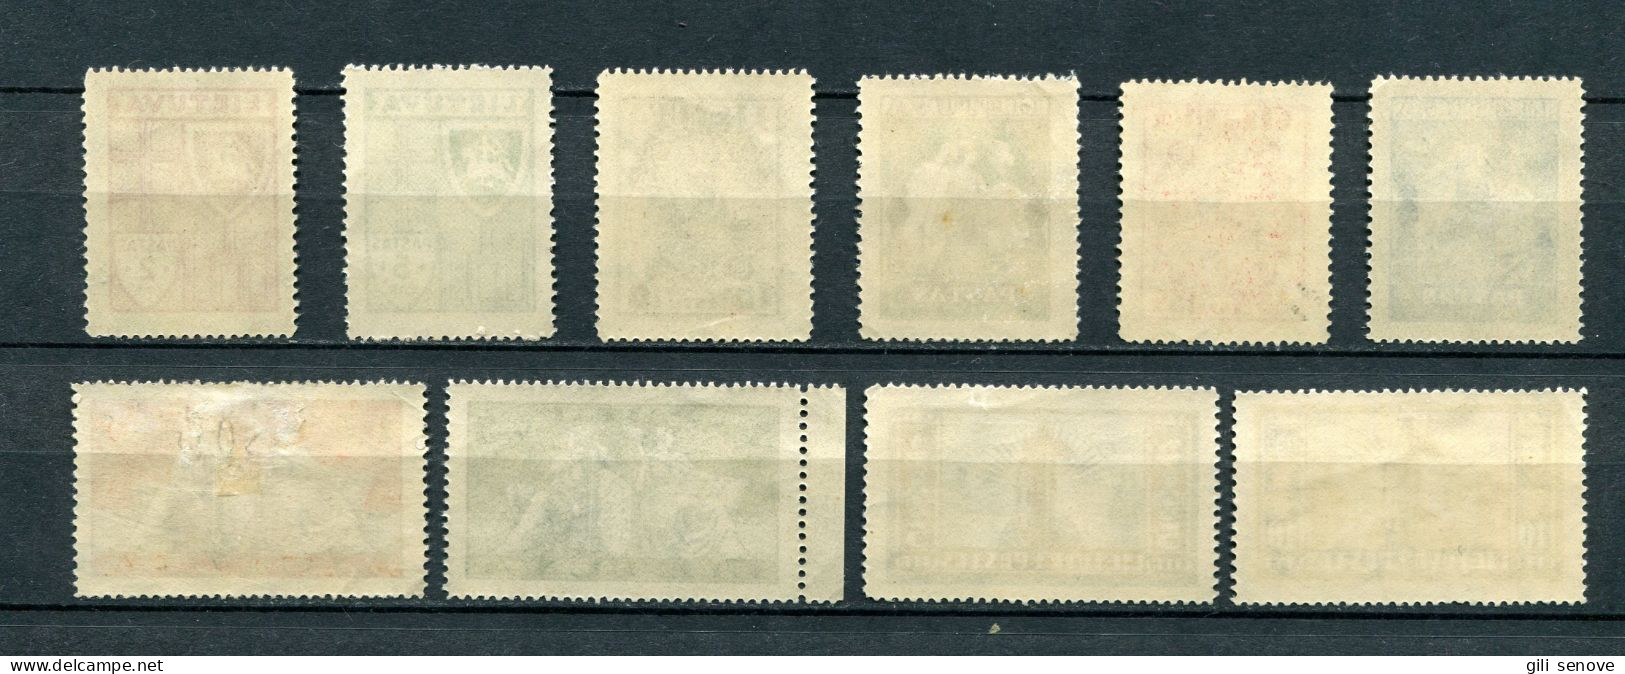 Lithuania 1934 Mi. 394-403 Sc 286-295 New Definitive Issue MH*/MNH** - Lithuania